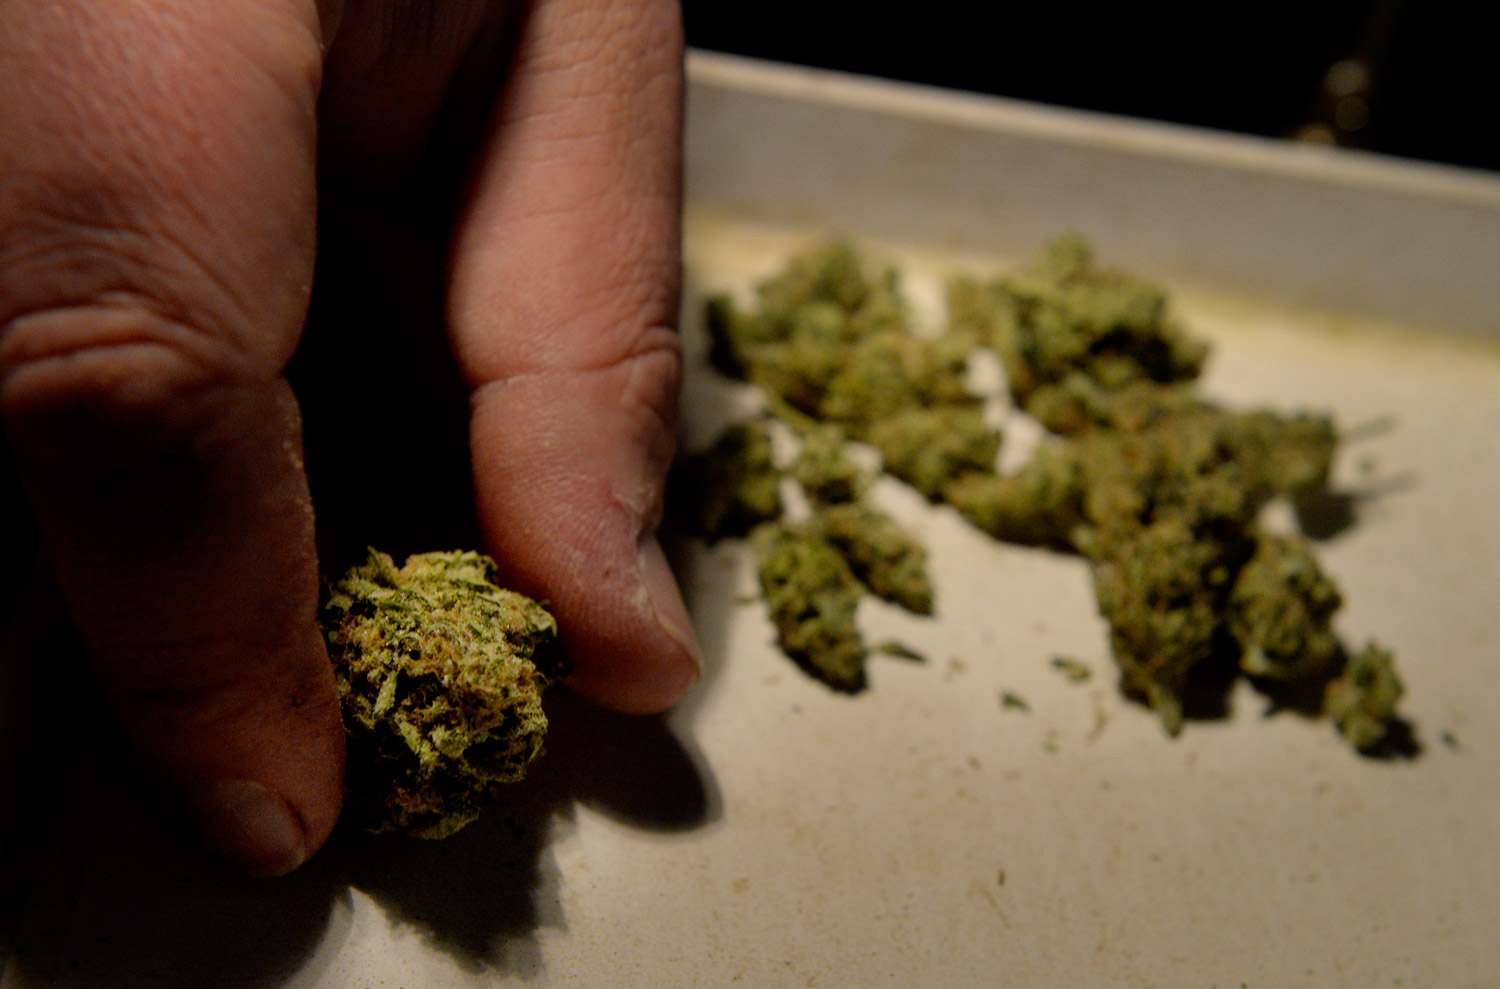 Parenting: A hope that my son waits until adulthood to choose marijuana